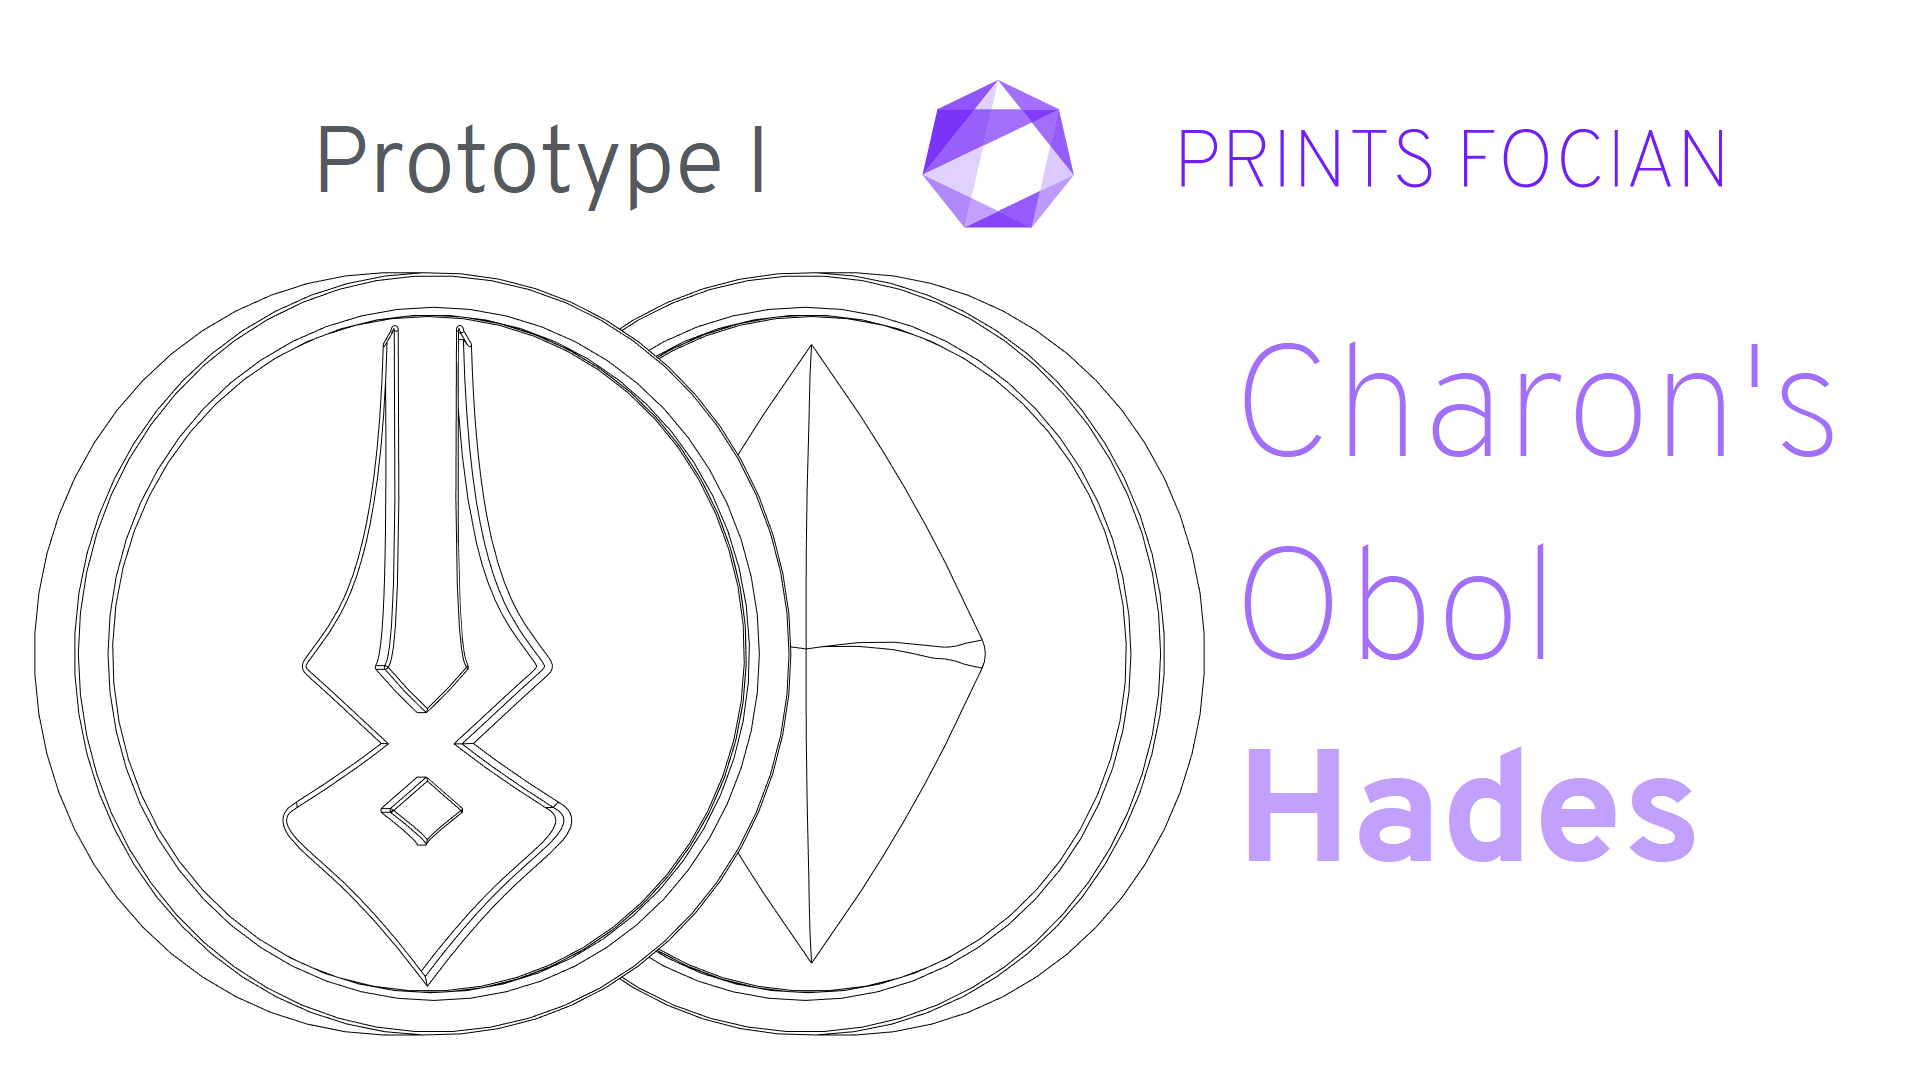 Wireframe image of Charon's Obol on a white background. Prints Focian Icon top and central. Text: Purple Prints Focian, Charon's Obol, and Hades. Dark grey text Prototype I